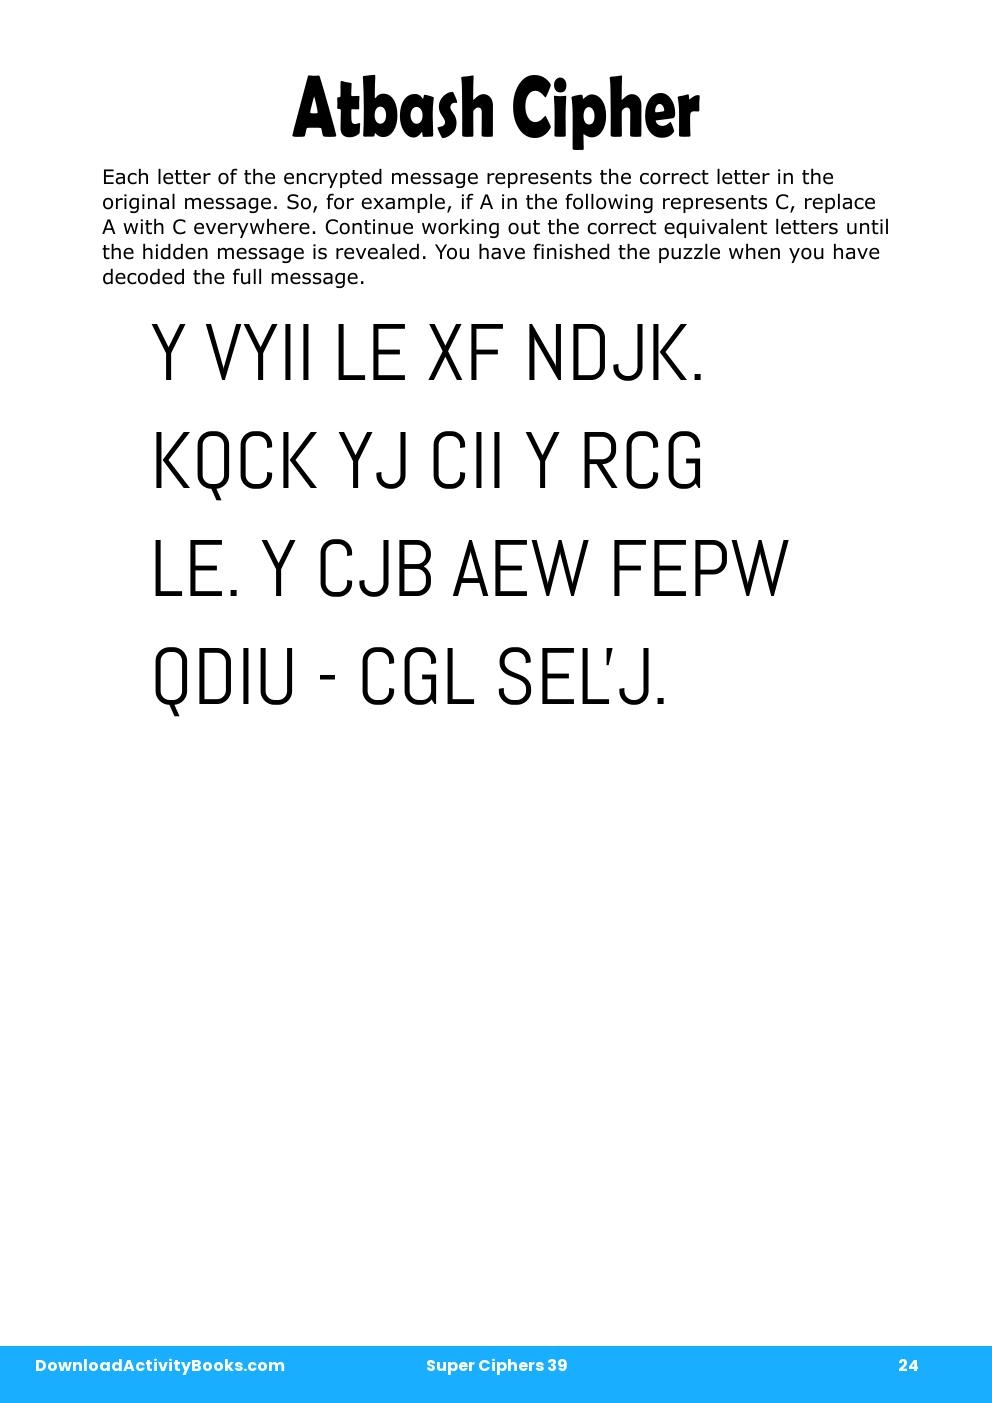 Atbash Cipher in Super Ciphers 39